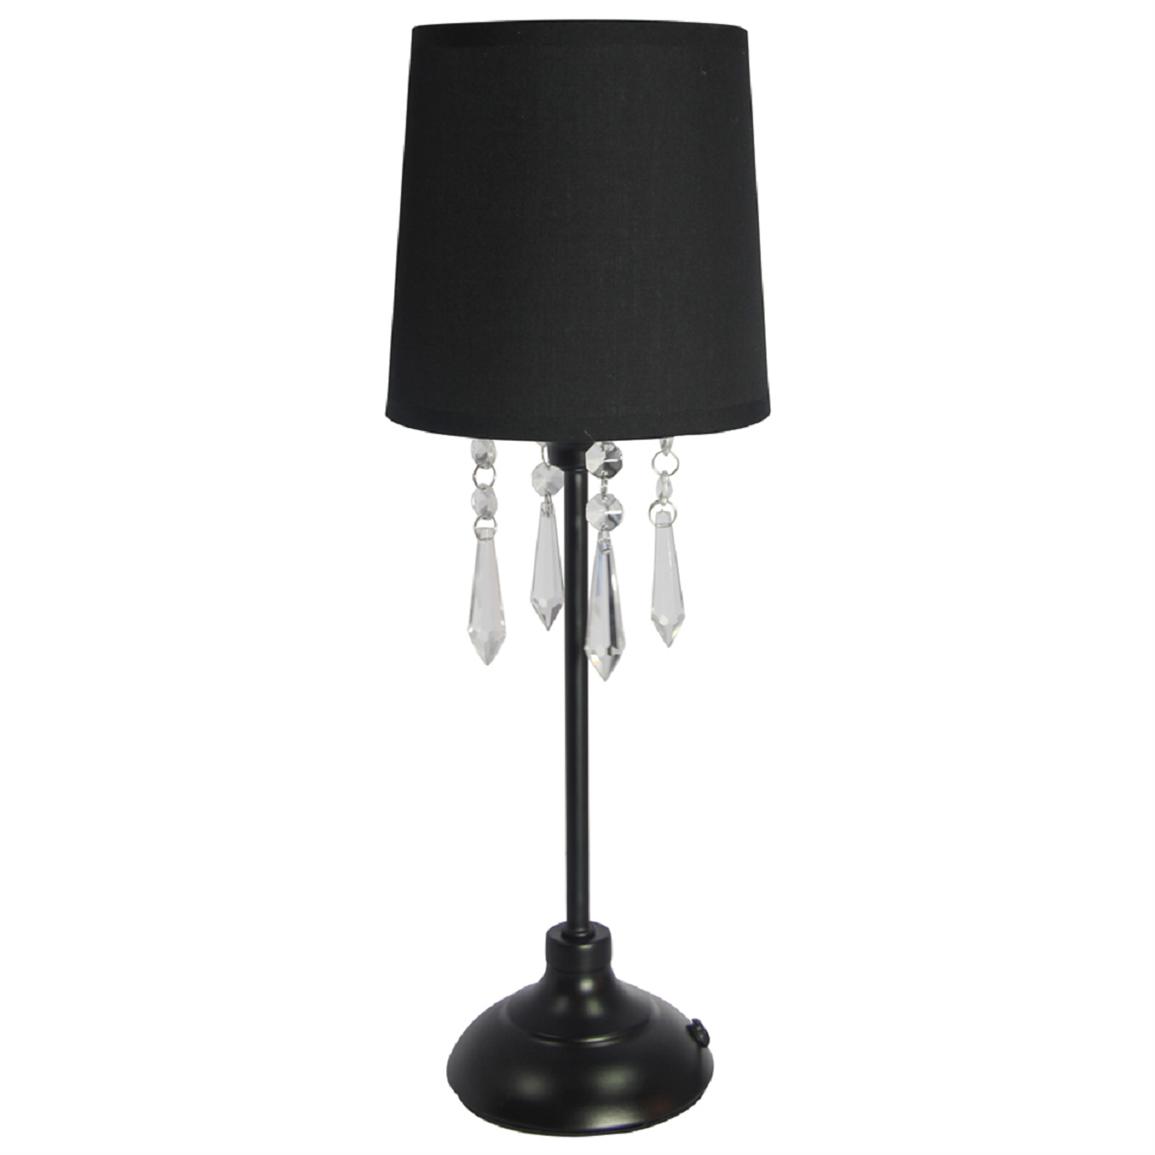 Simple Designs Acrylic Table Lamp - 421603, Lighting at Sportsman's Guide